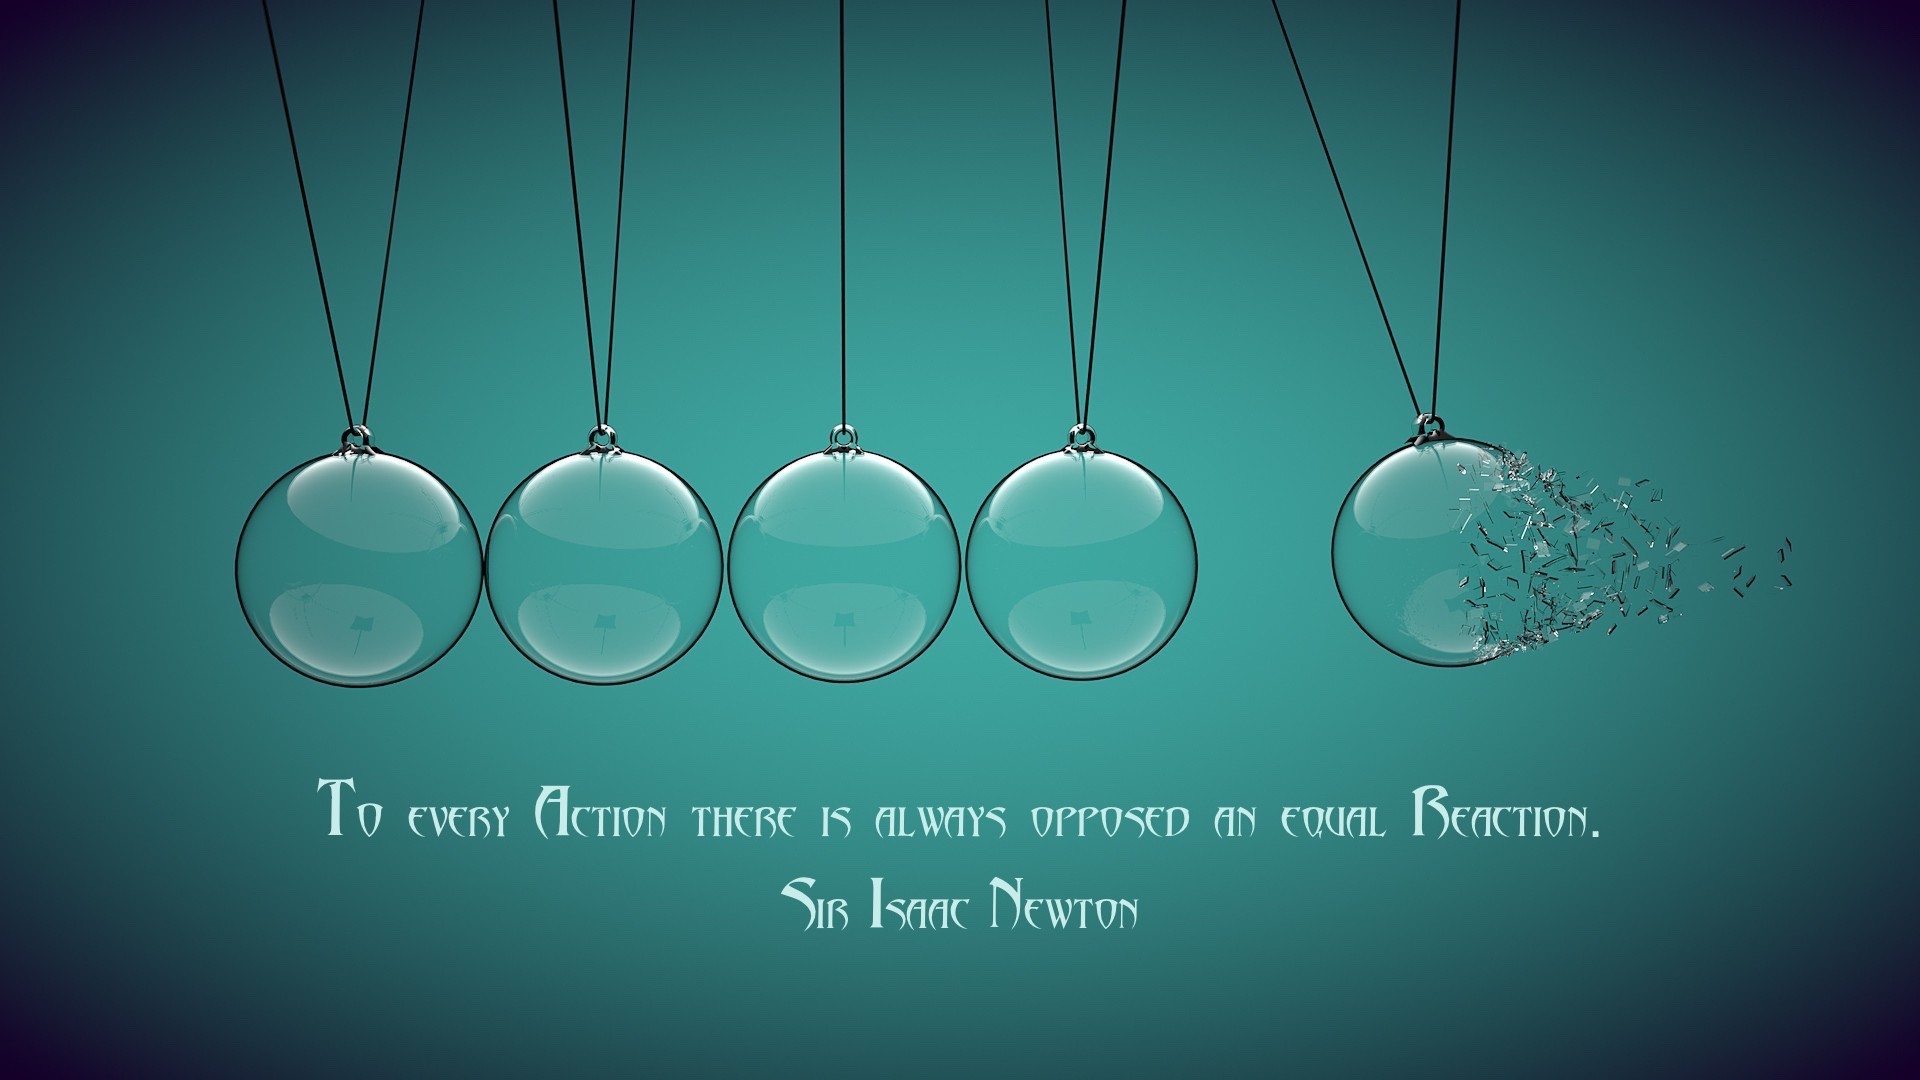 1920x1080 ... Sir Isaac Newton Quote by RSeer